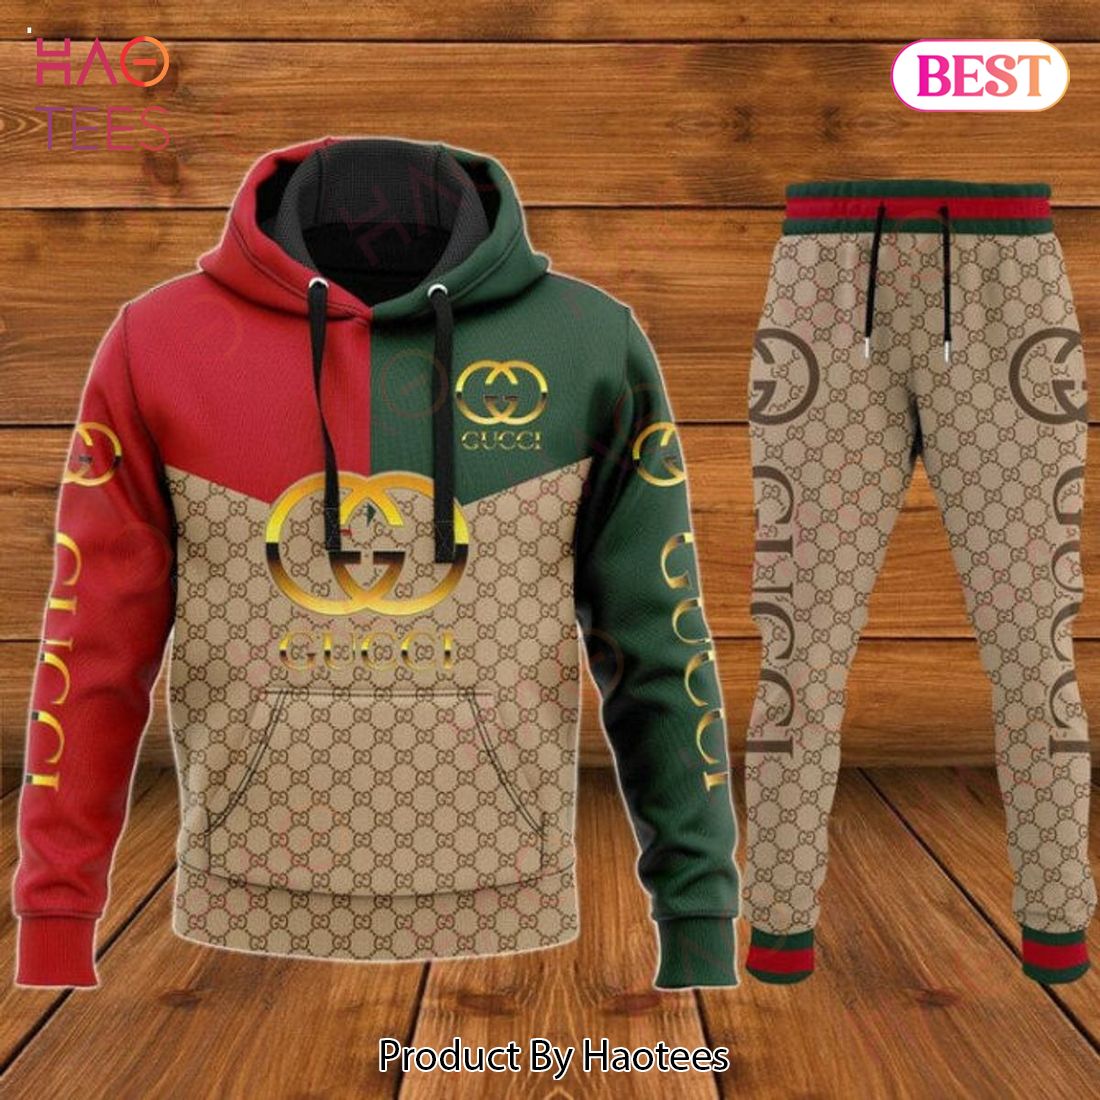 Gucci New Luxury Brand Clothes Leggings and Crop Top Set For Women